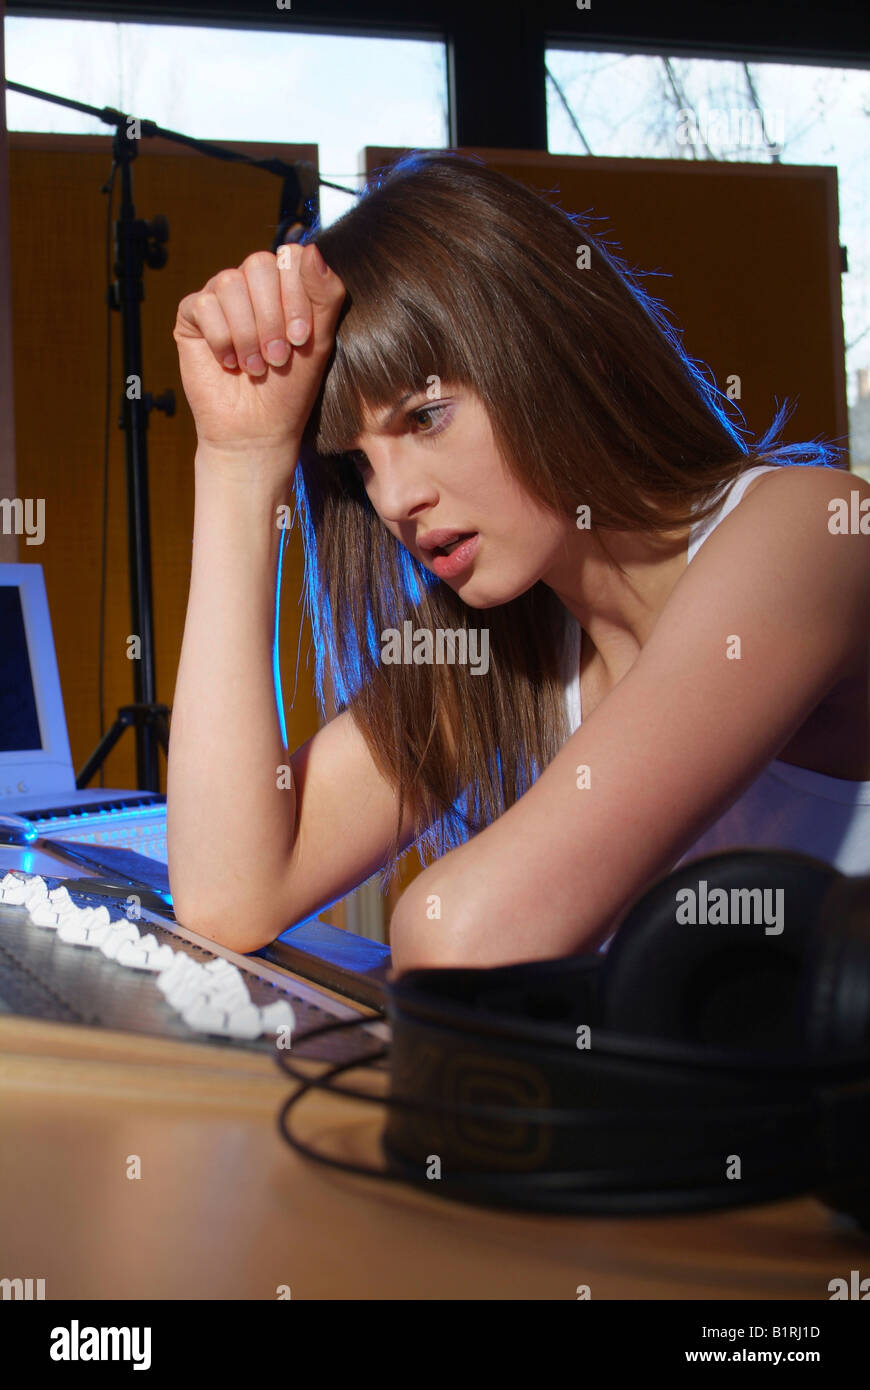 Disappointed young woman sitting at a mixer in a recording studio Stock Photo